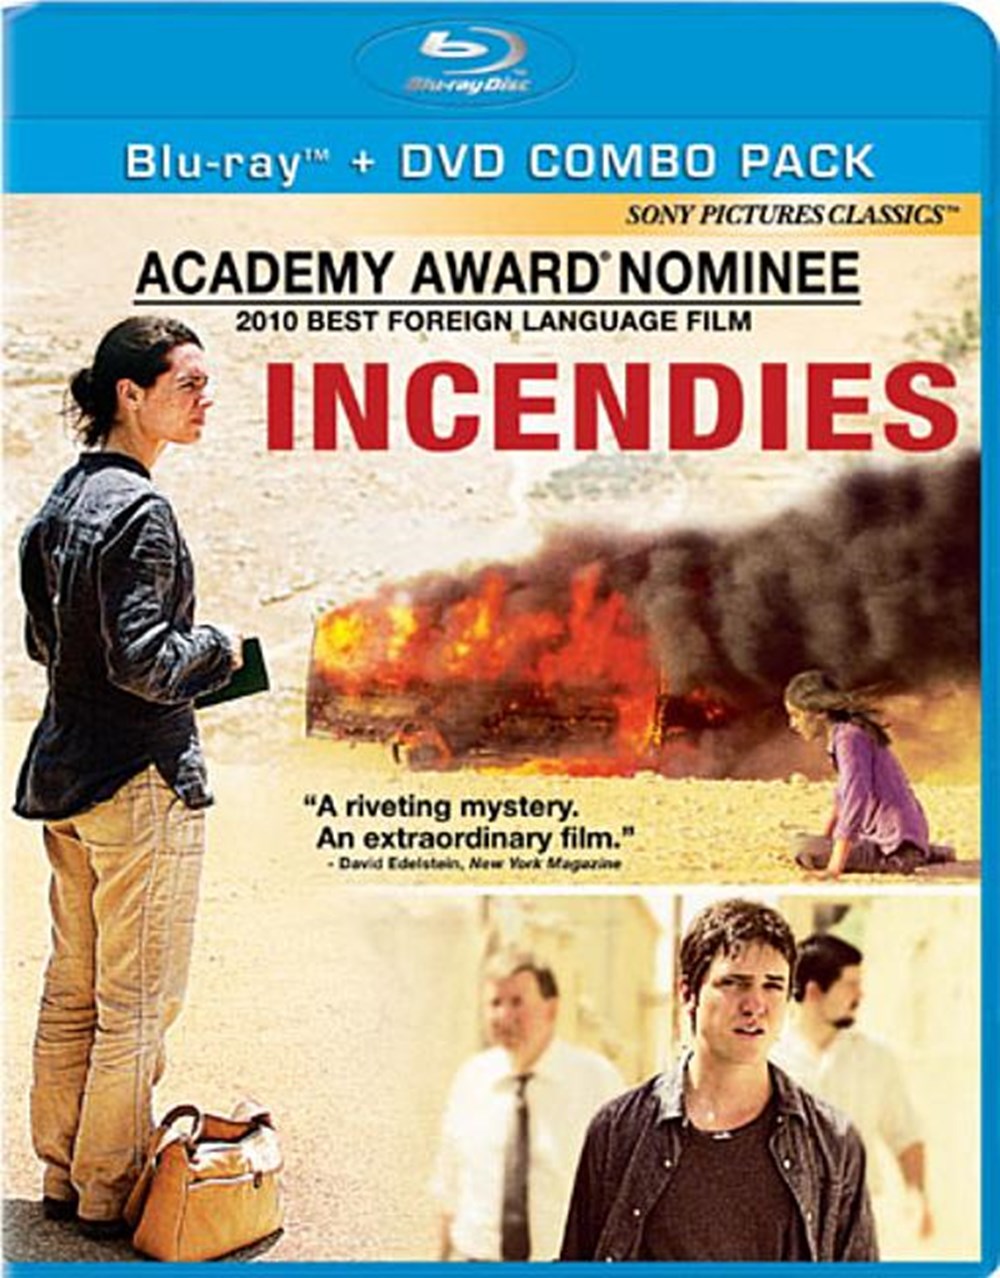 Incendies (DVD Included)